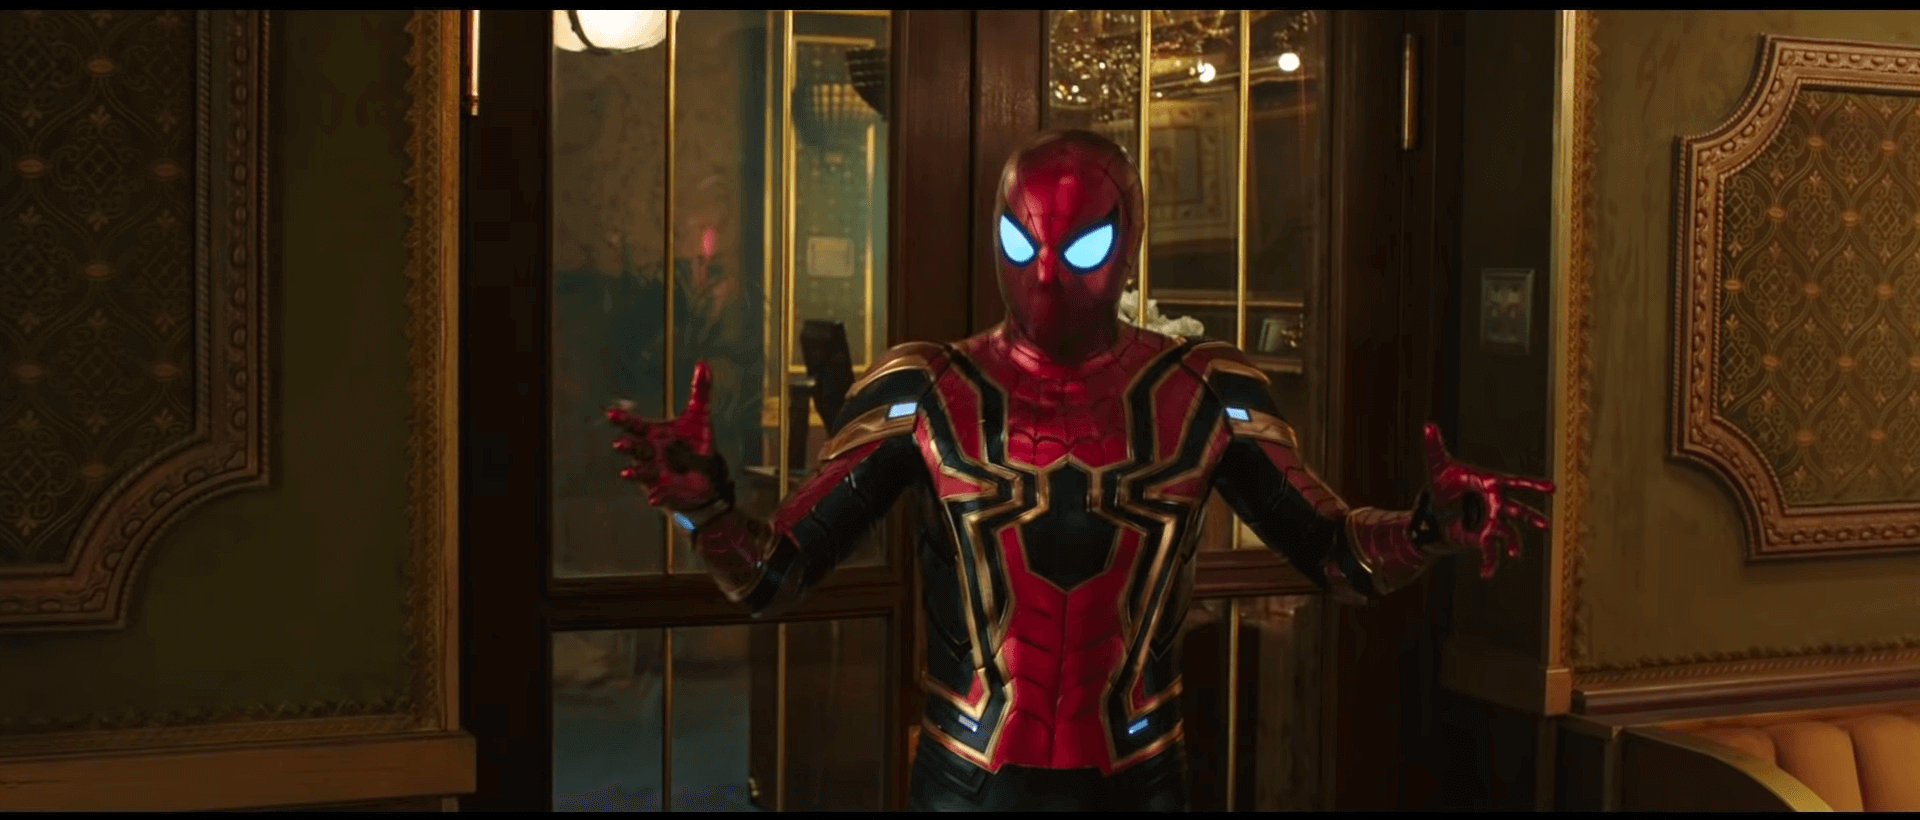 SpiderMan Far From Home (2019) Movie HD Image